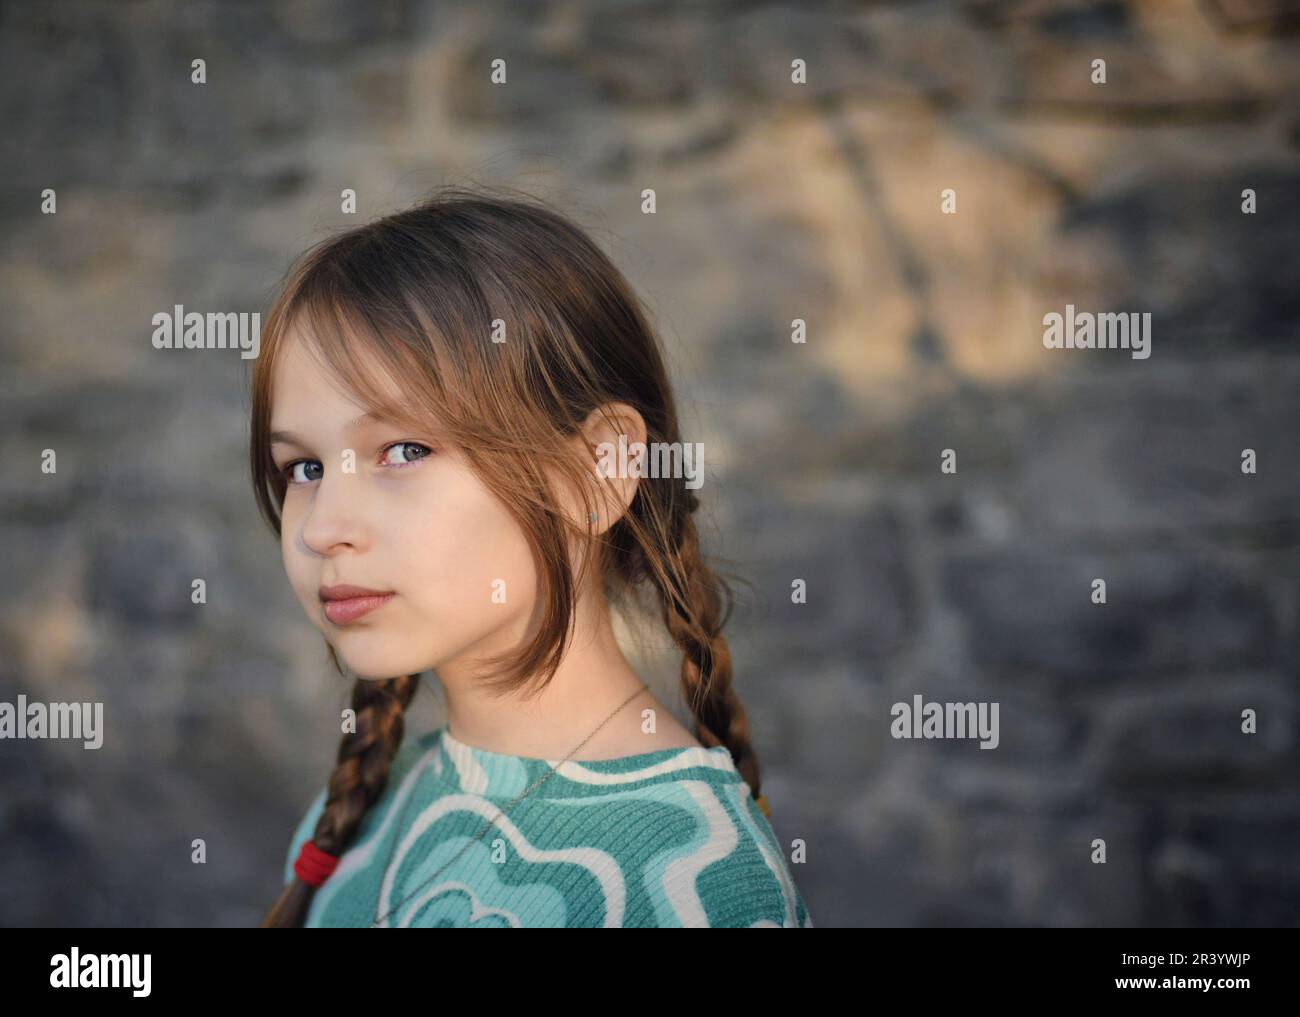 Beautiful young blonde little girl wearing pigtail hairstyle posing with stone brick wall in the background Stock Photo